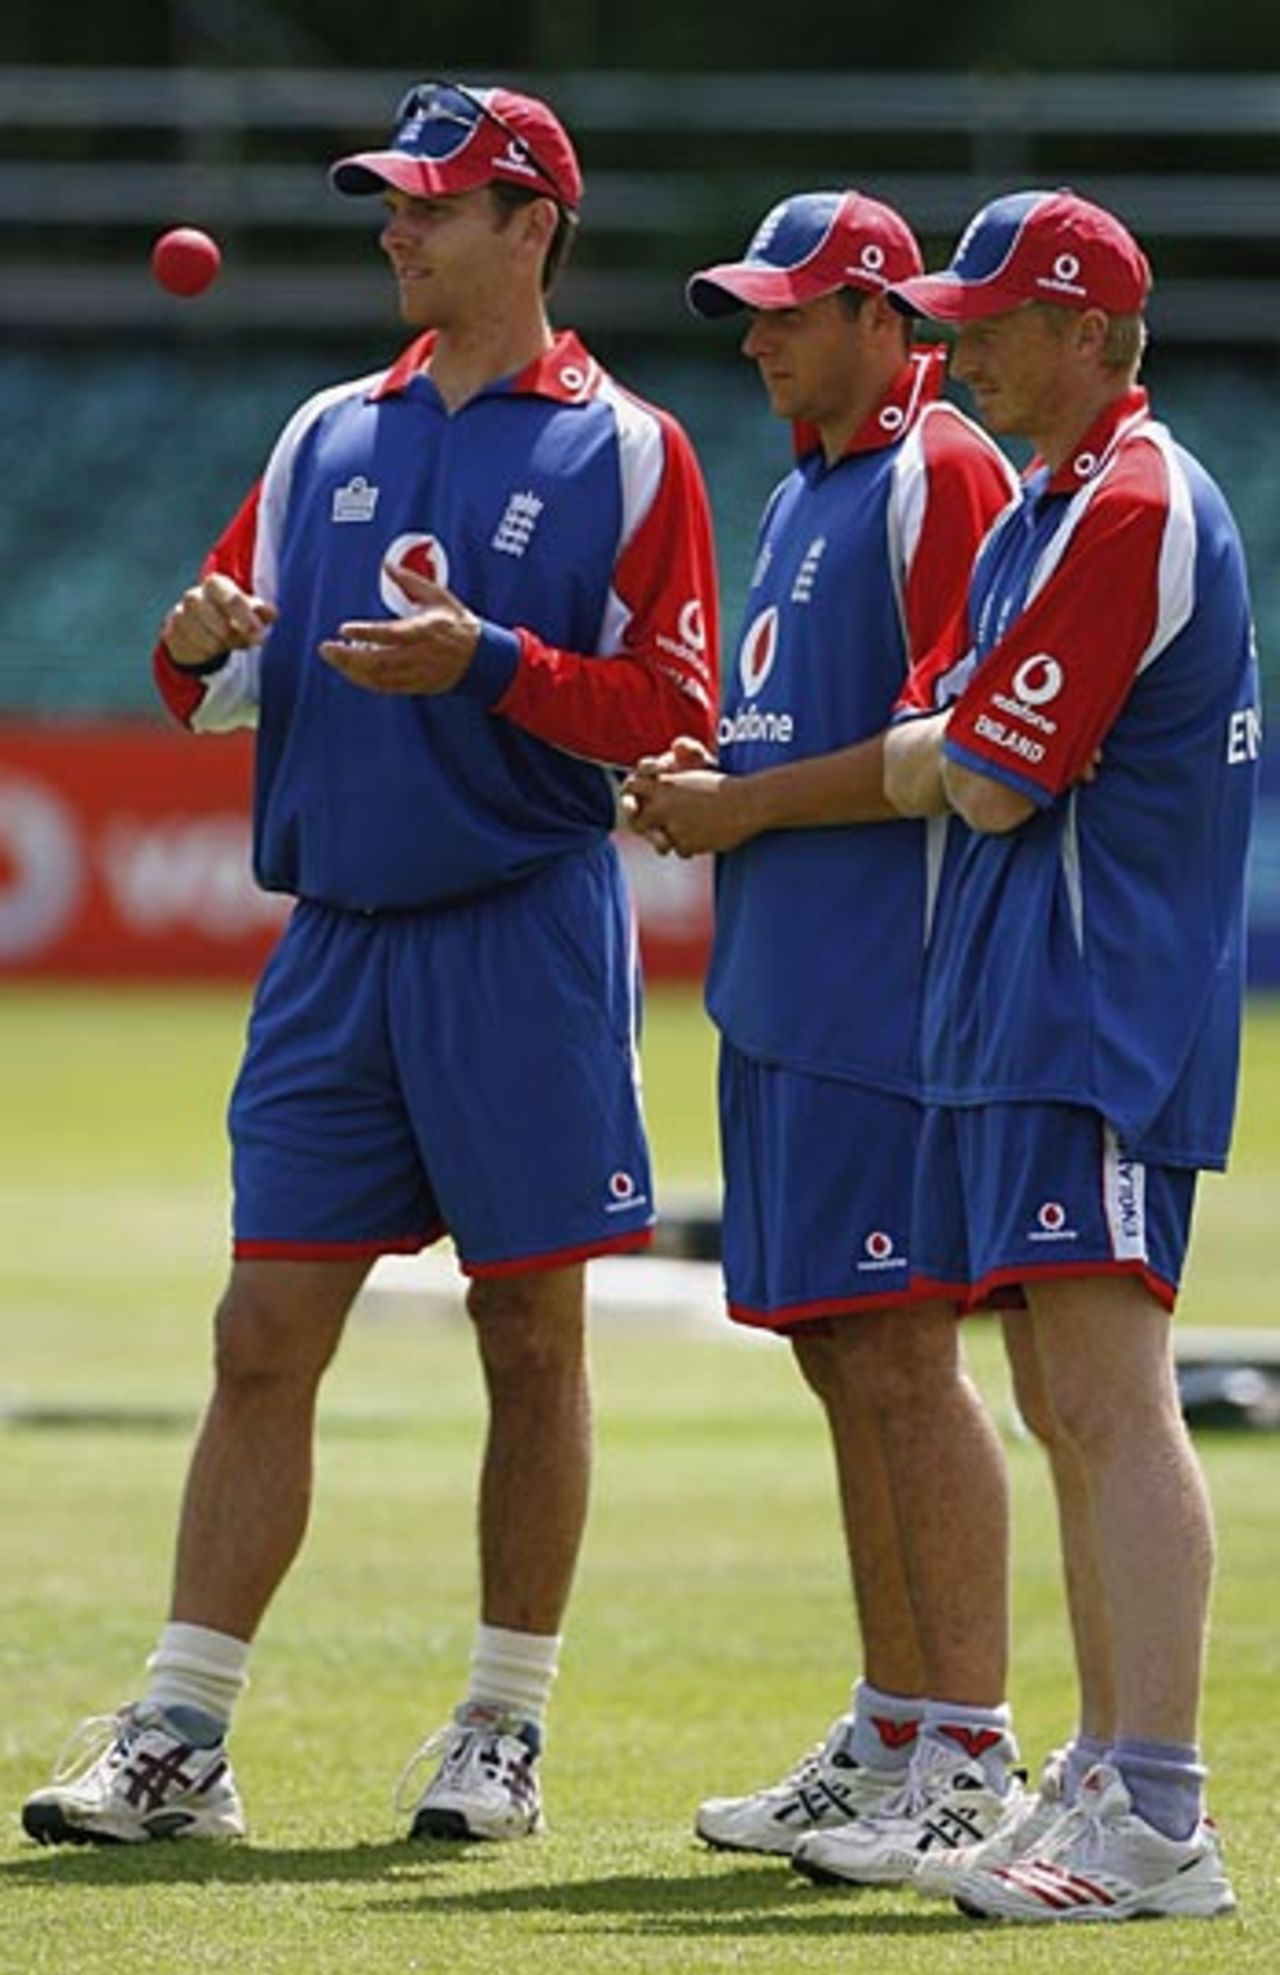 England's new boys - Alex Loudon, Tim Bresnan and Glen Chapple - in the nets at Belfast, June 12, 2006